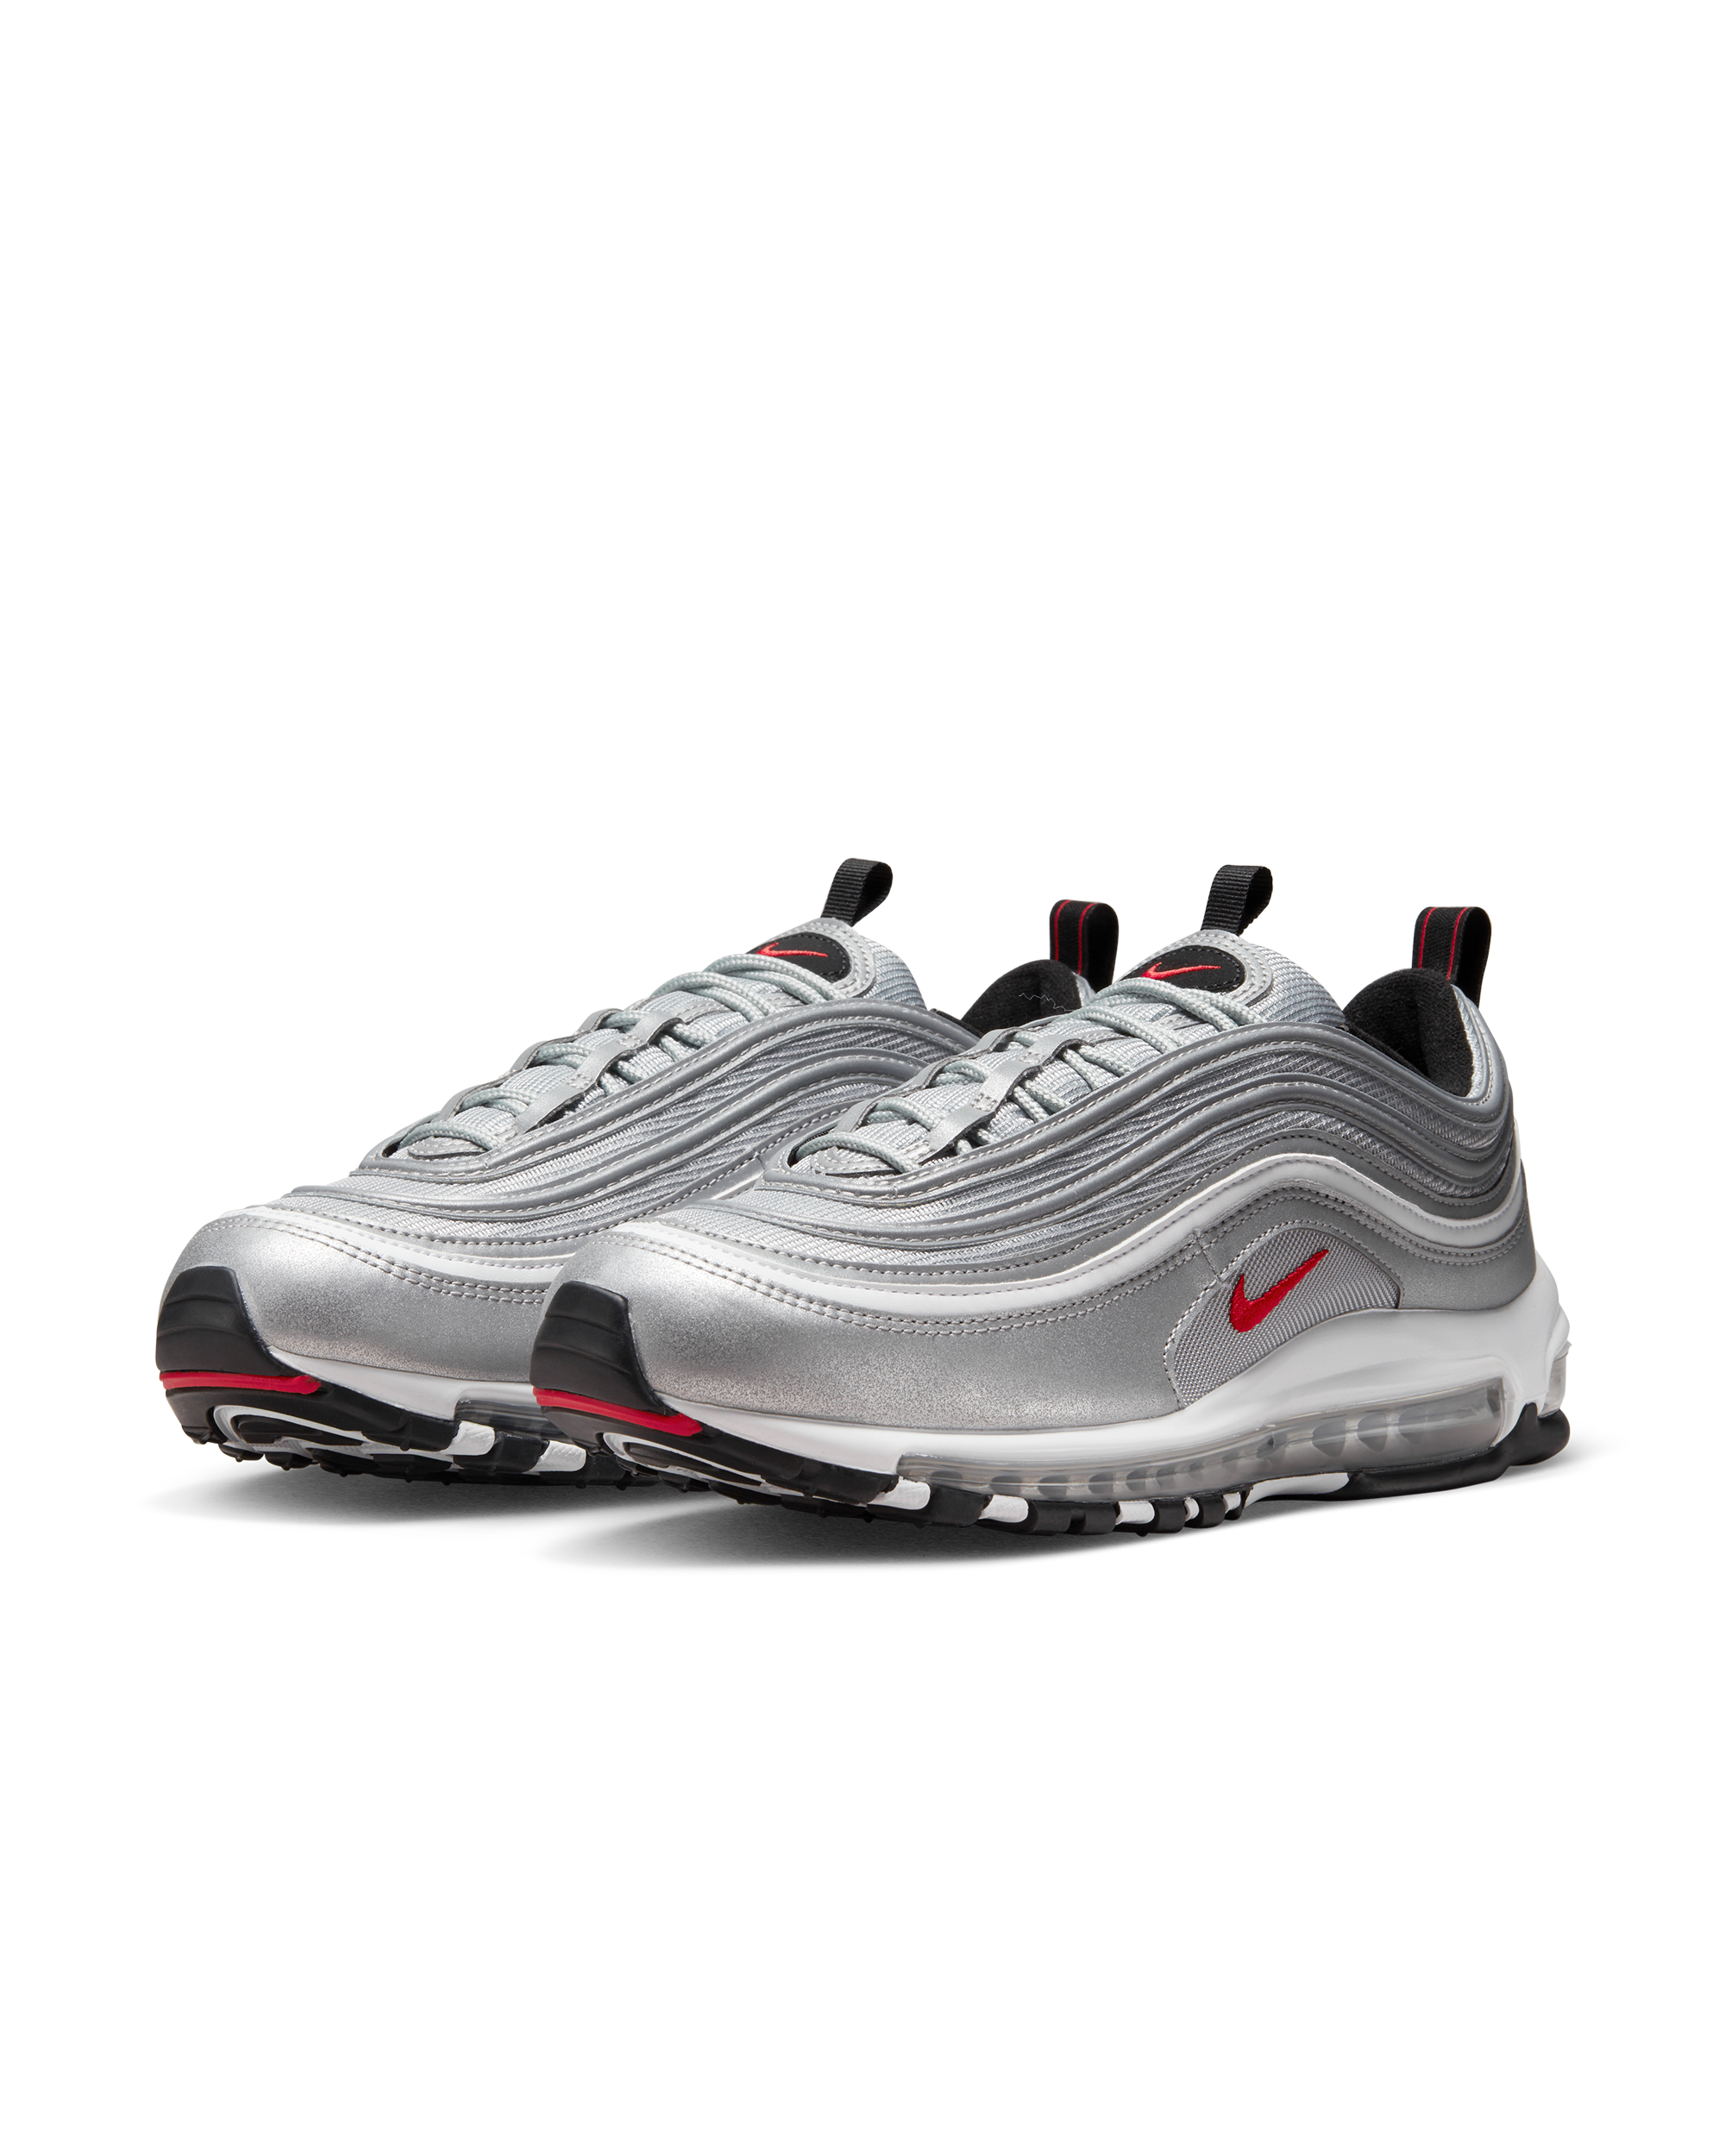 Womens Air Max 97 OG "Silver bullet" - Silver / Red